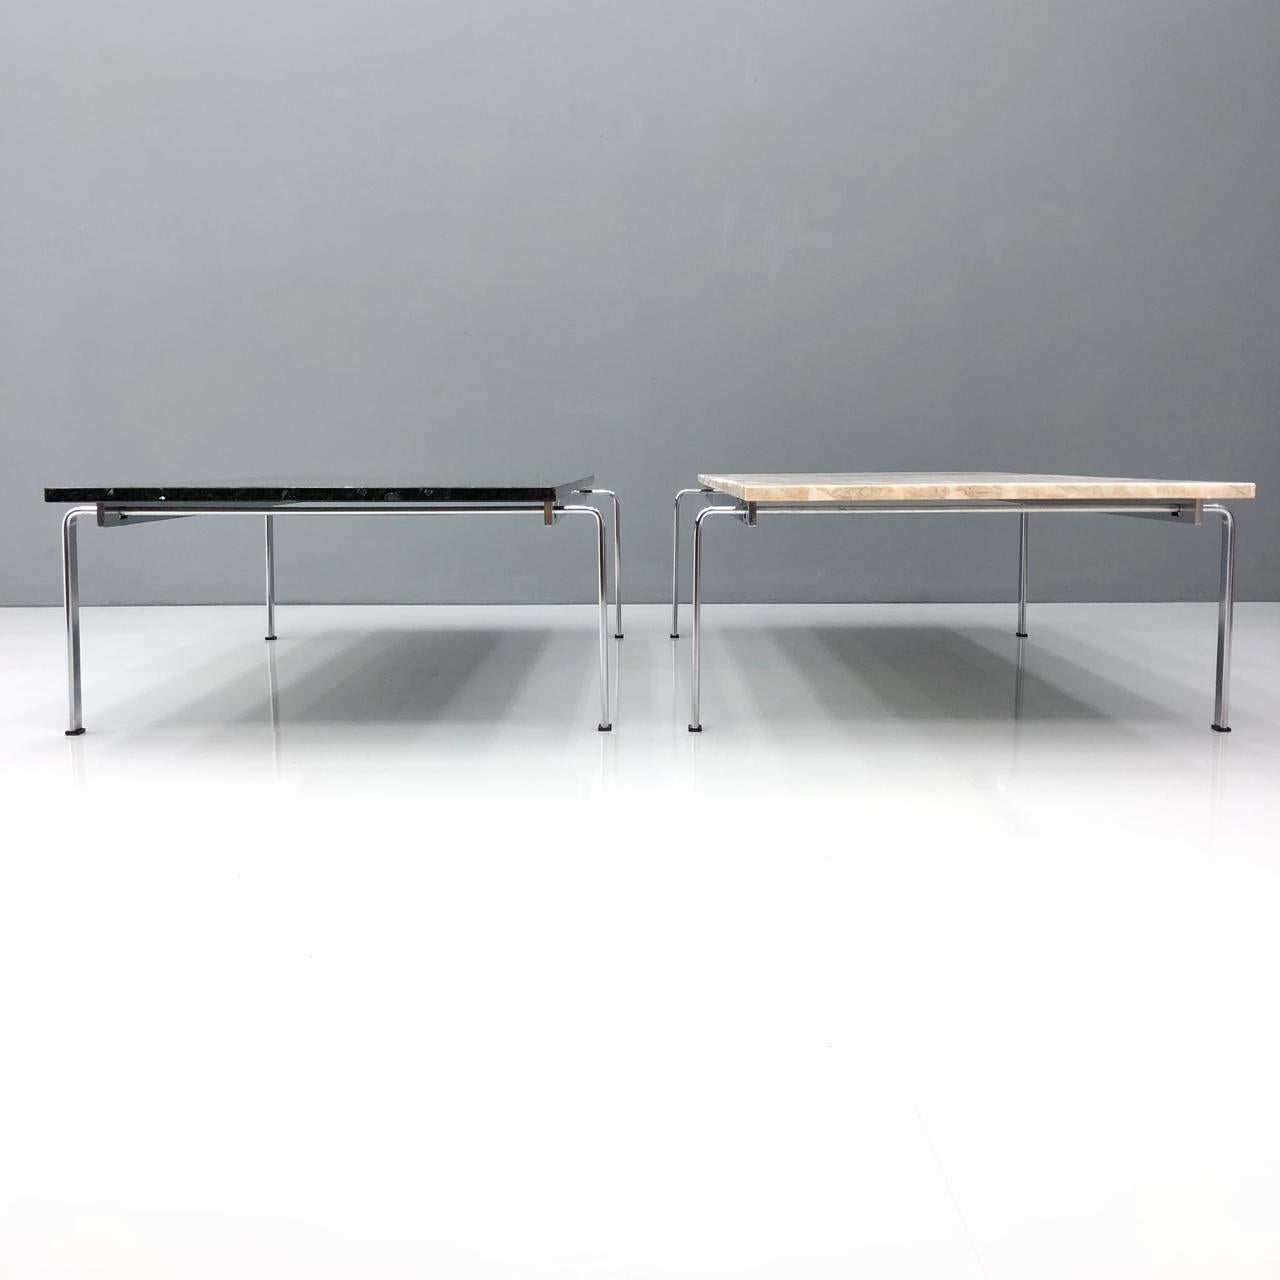 Coffee table FK 91 by Preben Fabricius & Jørgen Kastholm, Kill Production. Only the white marble table is available.
Measures: W 150 cm, D 85 cm, H 38 cm.
Very good condition.
 